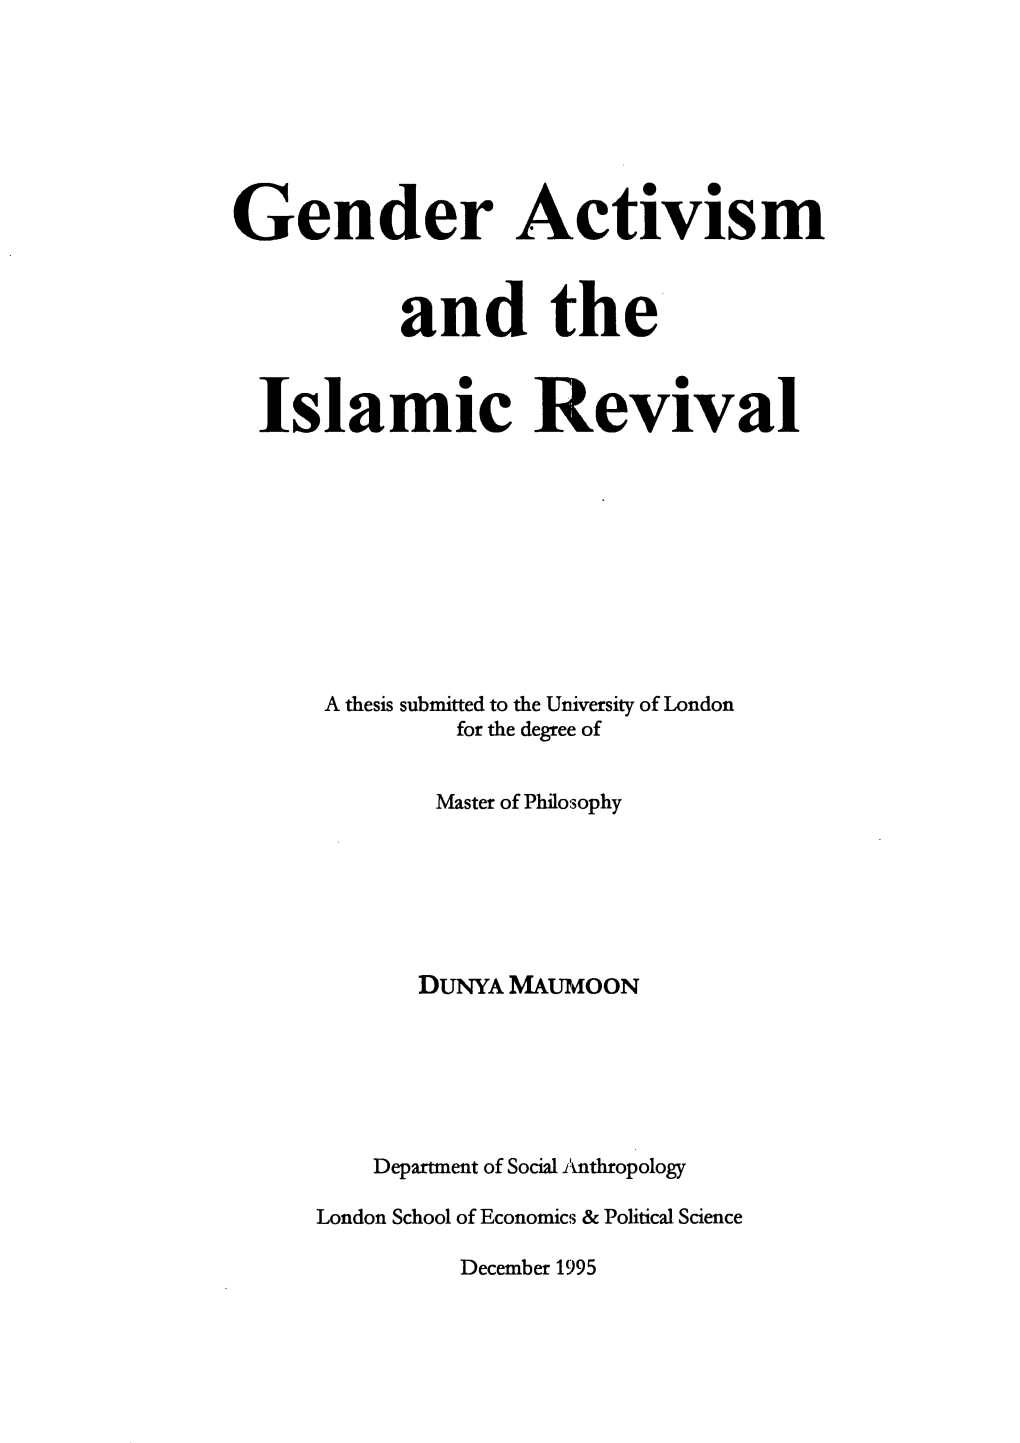 Gender Activism and the Islamic Revival